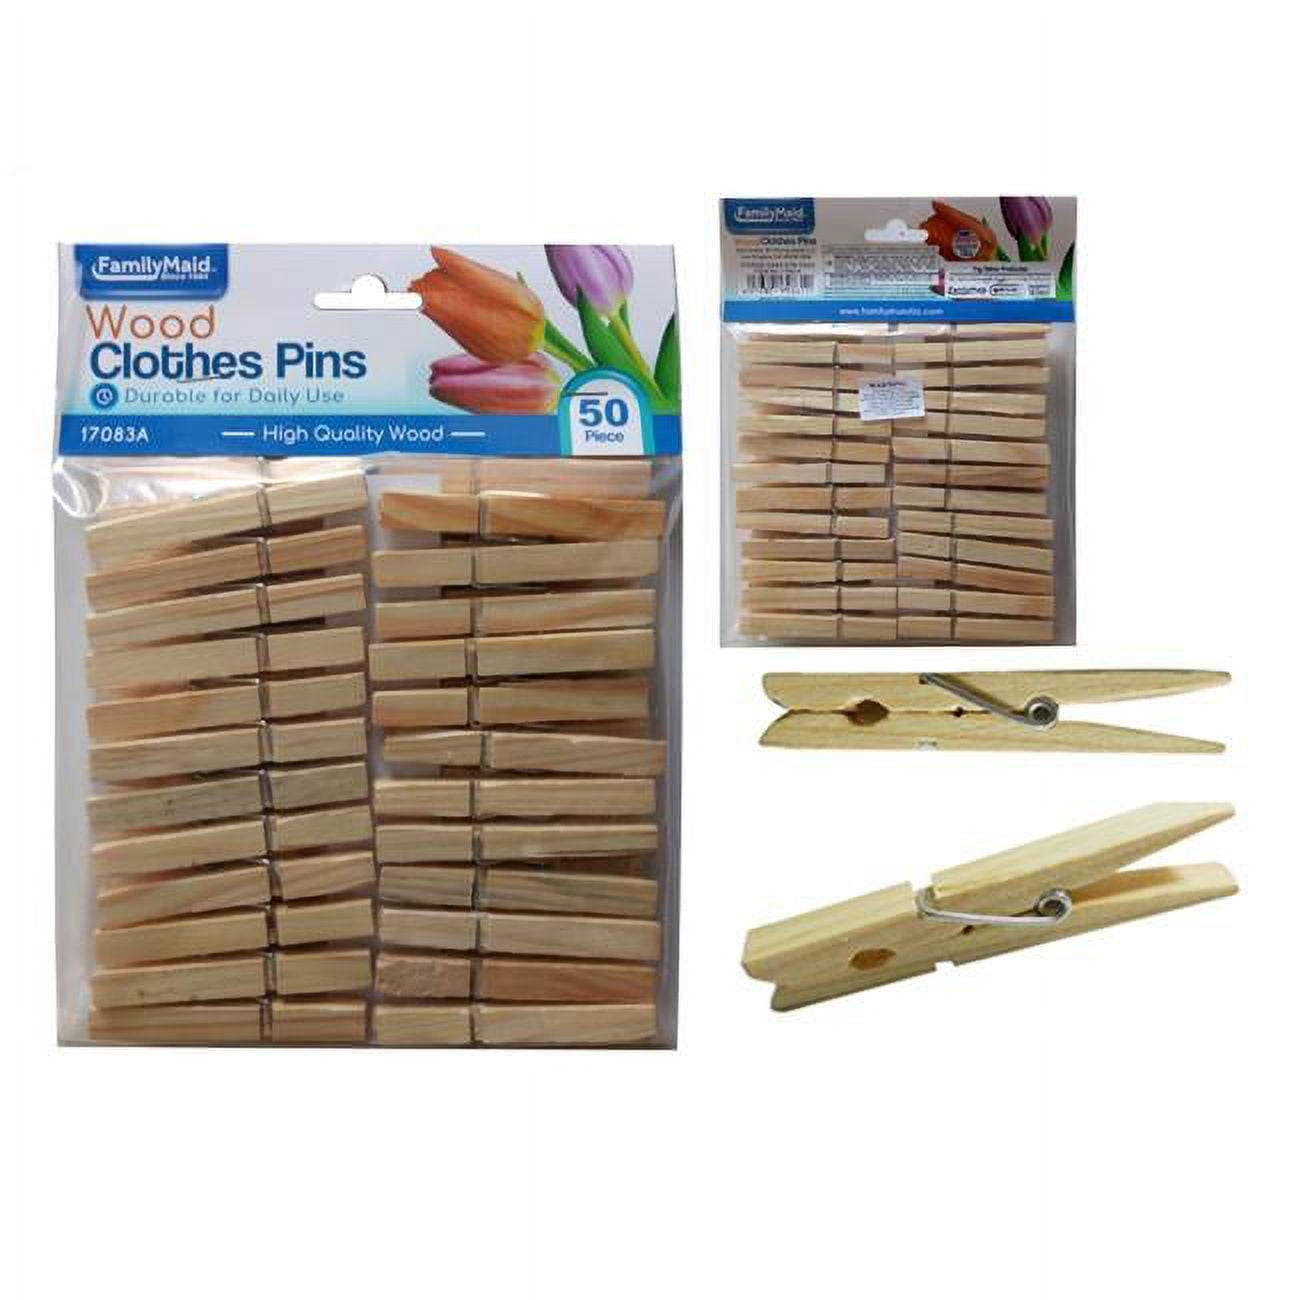 Family Maid 17083A Wooden Pe Plus Header Cloth Peg - 50 Piece - Pack of 72